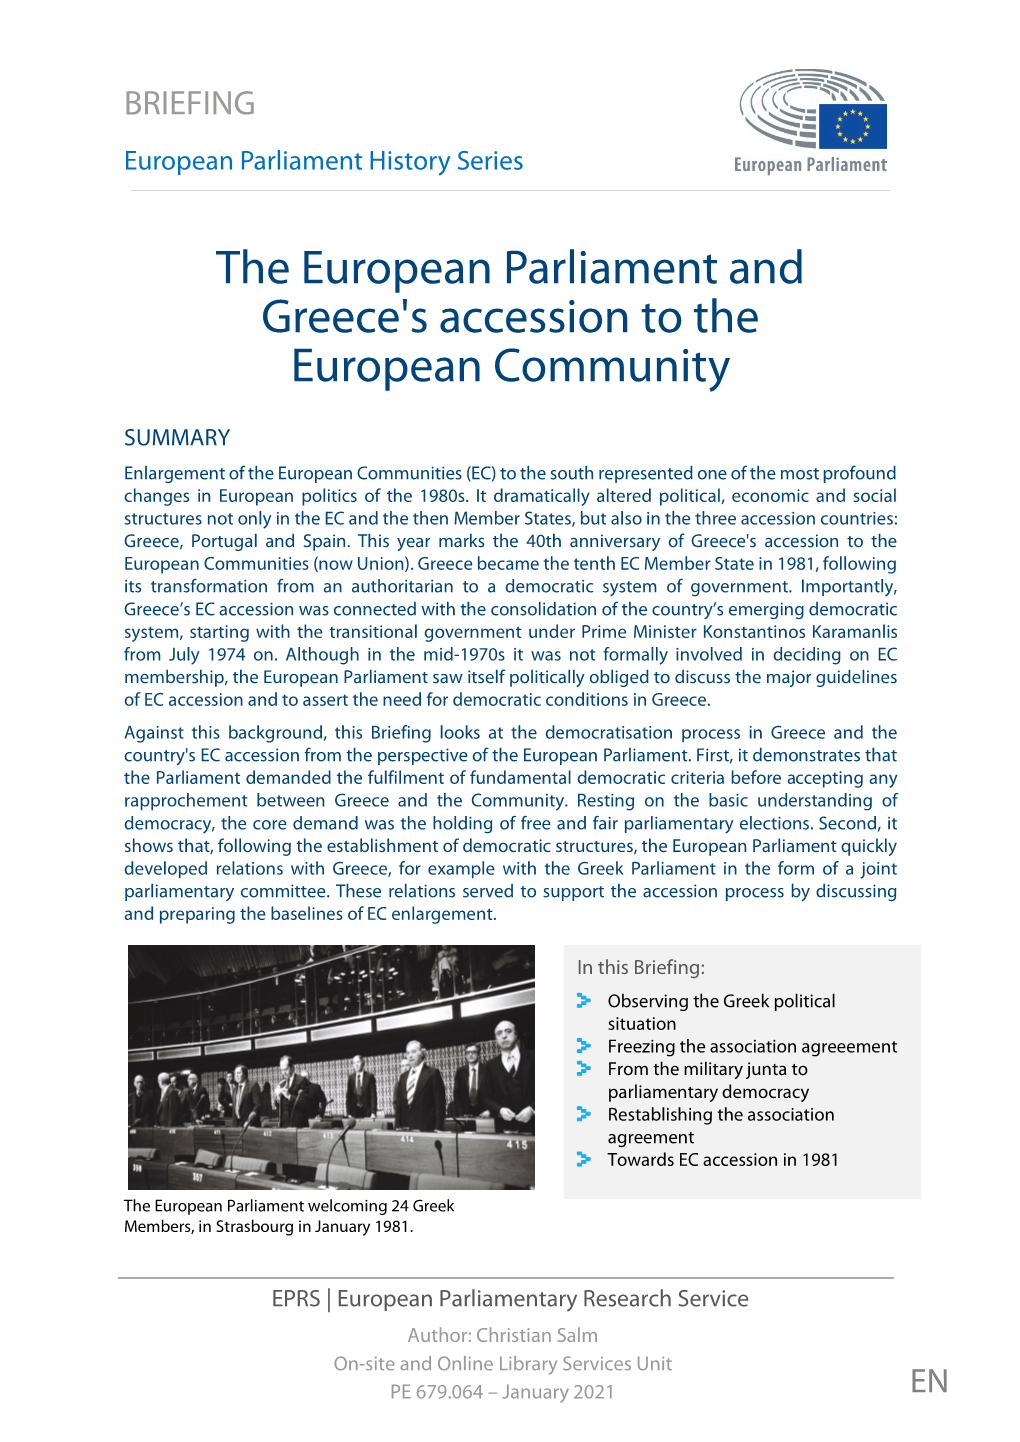 The European Parliament and Greece's Accession to the European Community